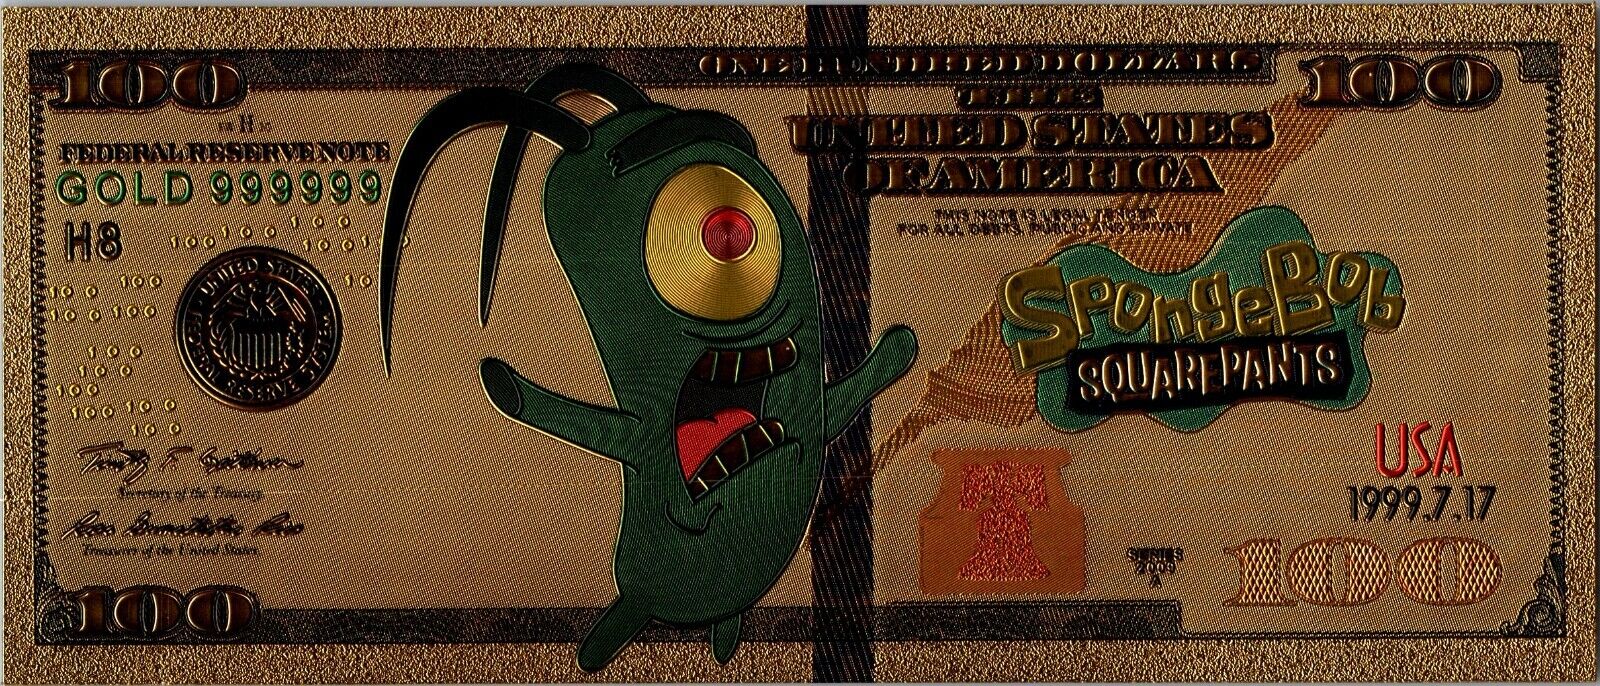 24k gold foil plated Plankton spongebob banknote Collectible